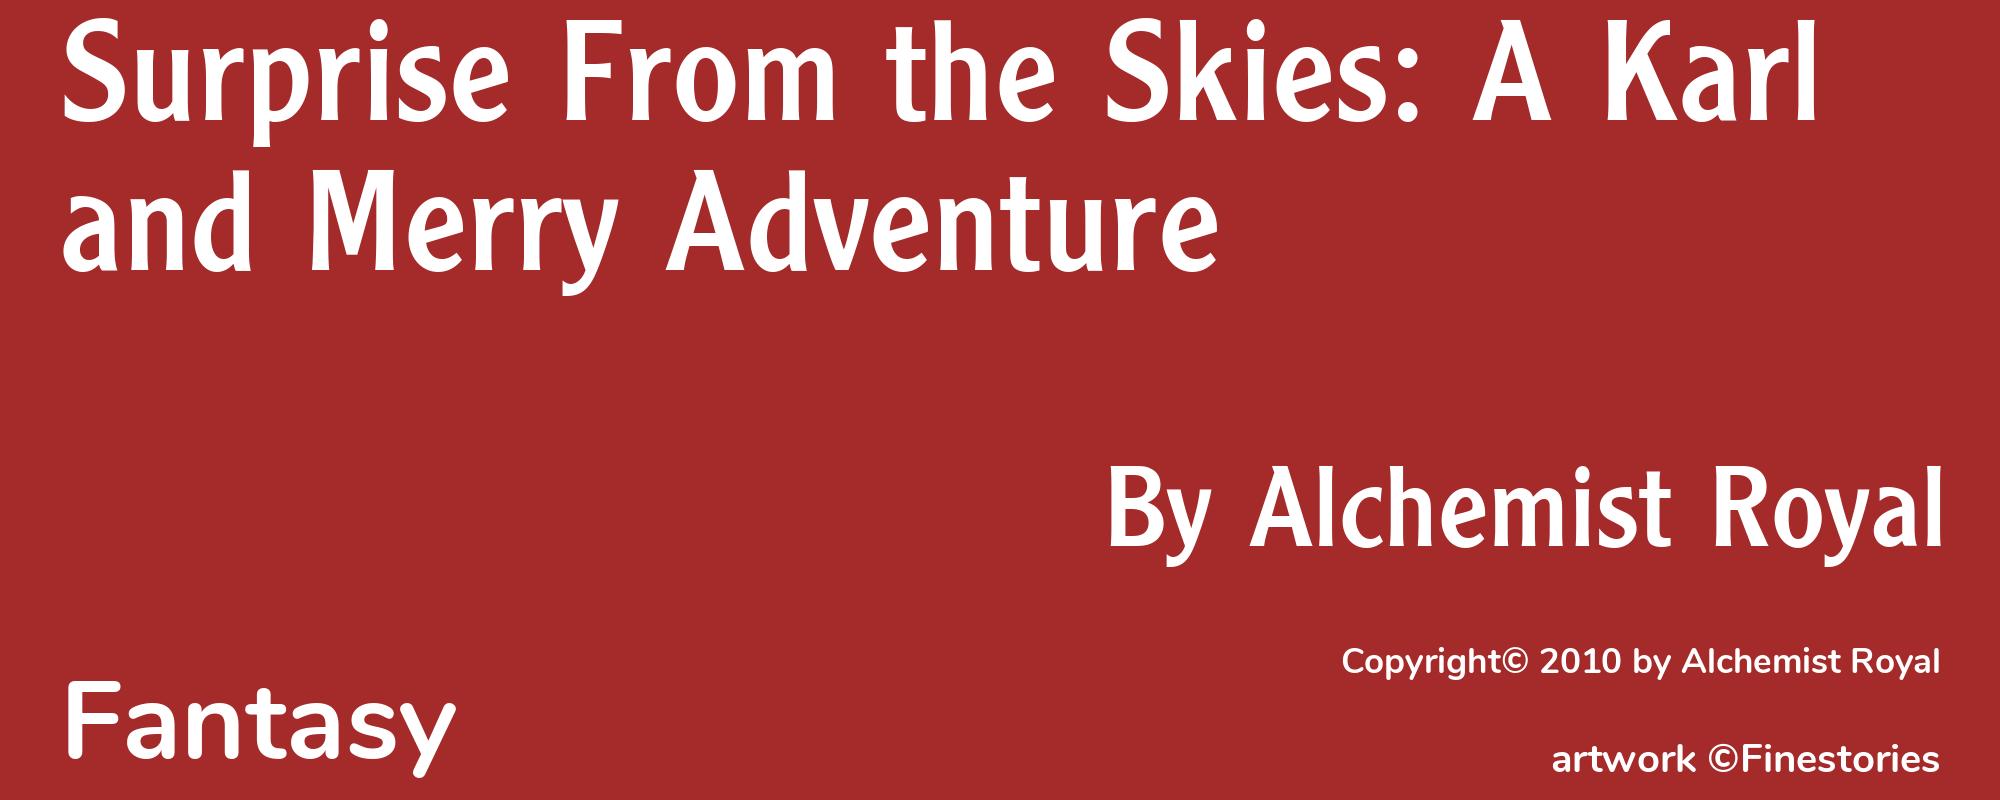 Surprise From the Skies: A Karl and Merry Adventure - Cover